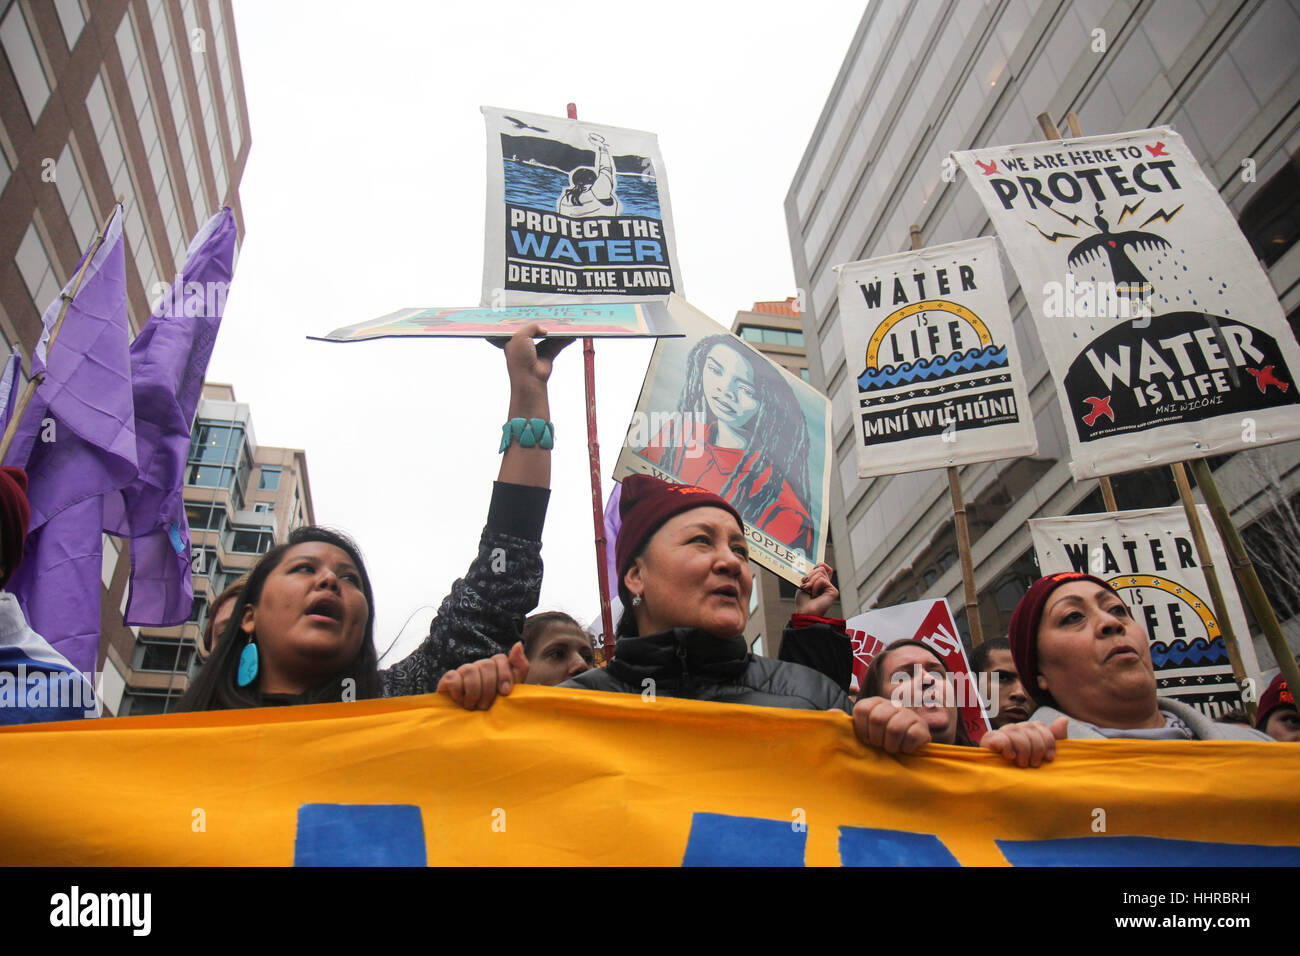 Washington, USA. 20th January, 2017. Protesters opposed to the Dakota Access Pipeline in North Dakota march through the streets on the day of the inauguration of Donald J Trump as President of the United States. Credit: Susan Pease/Alamy Live News Stock Photo